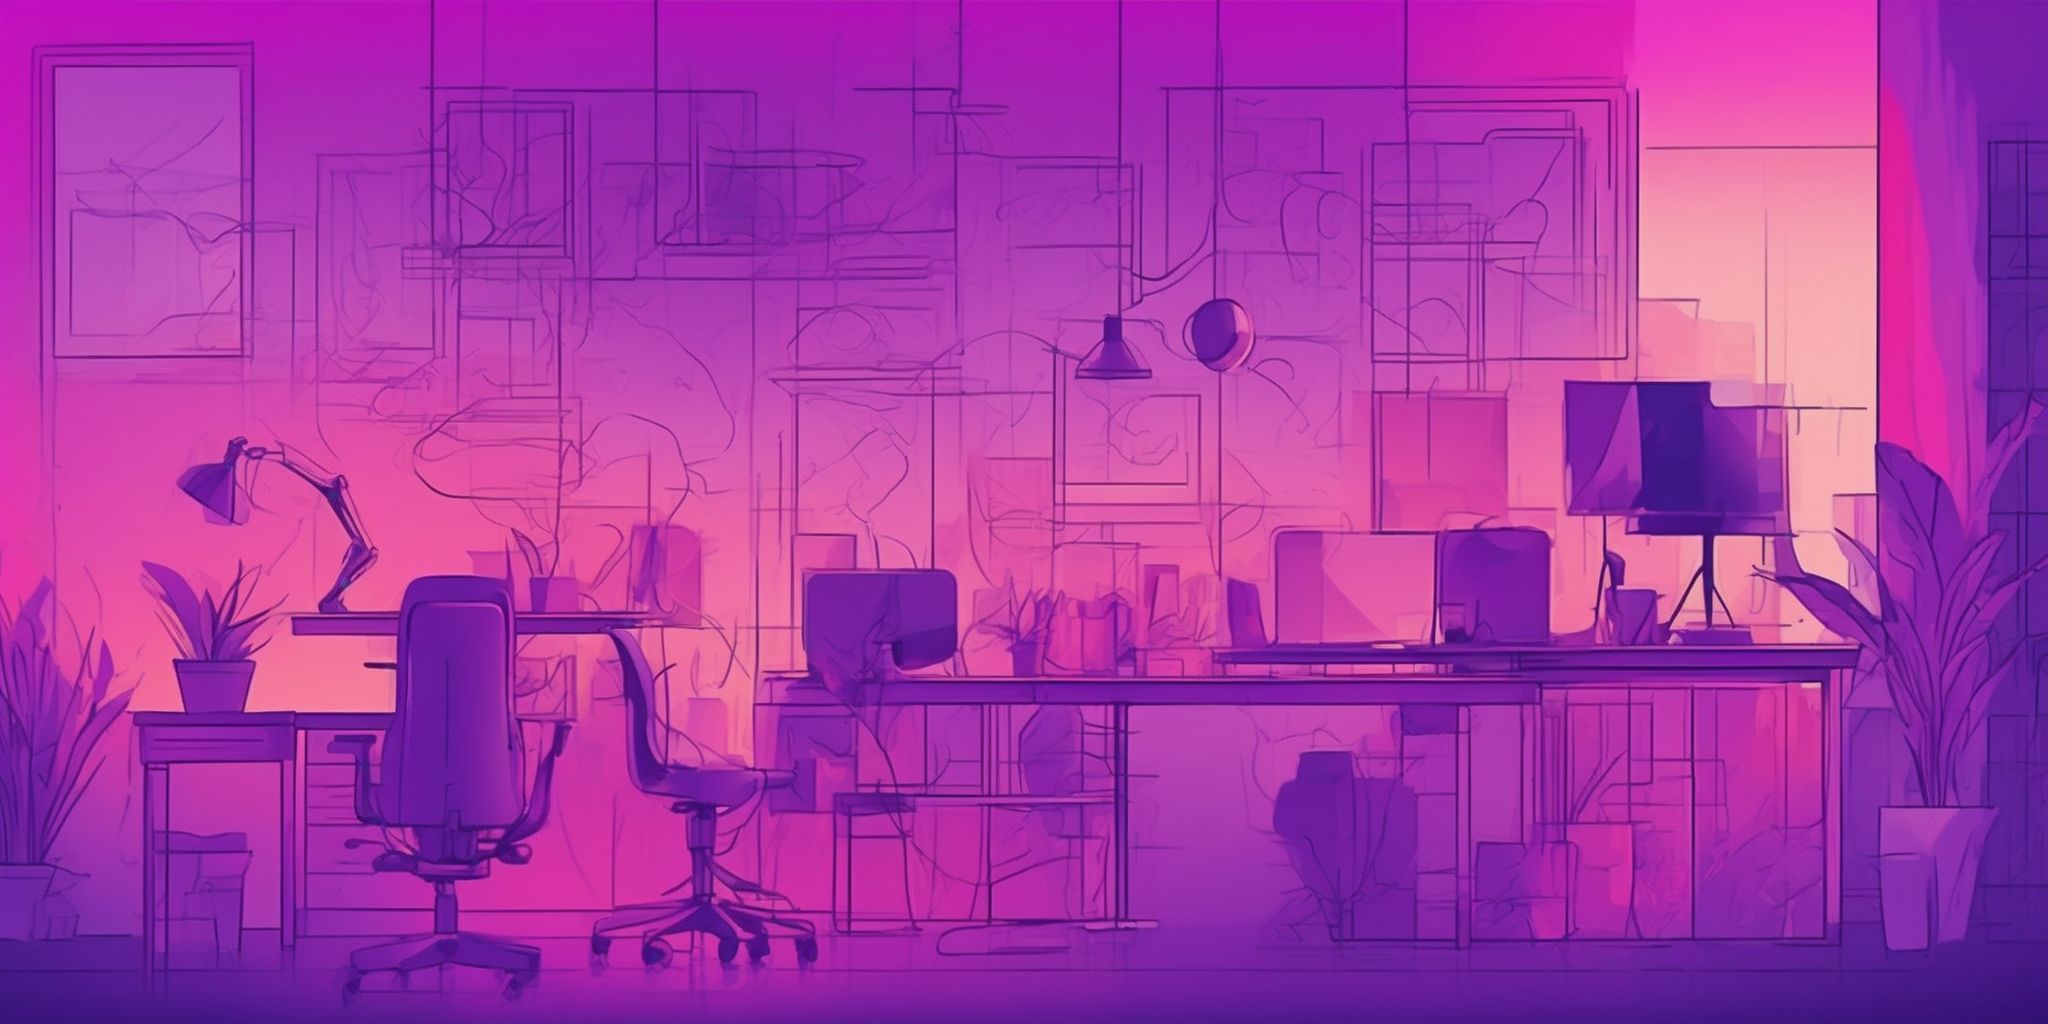 Drafting in flat illustration style, colorful purple gradient colors